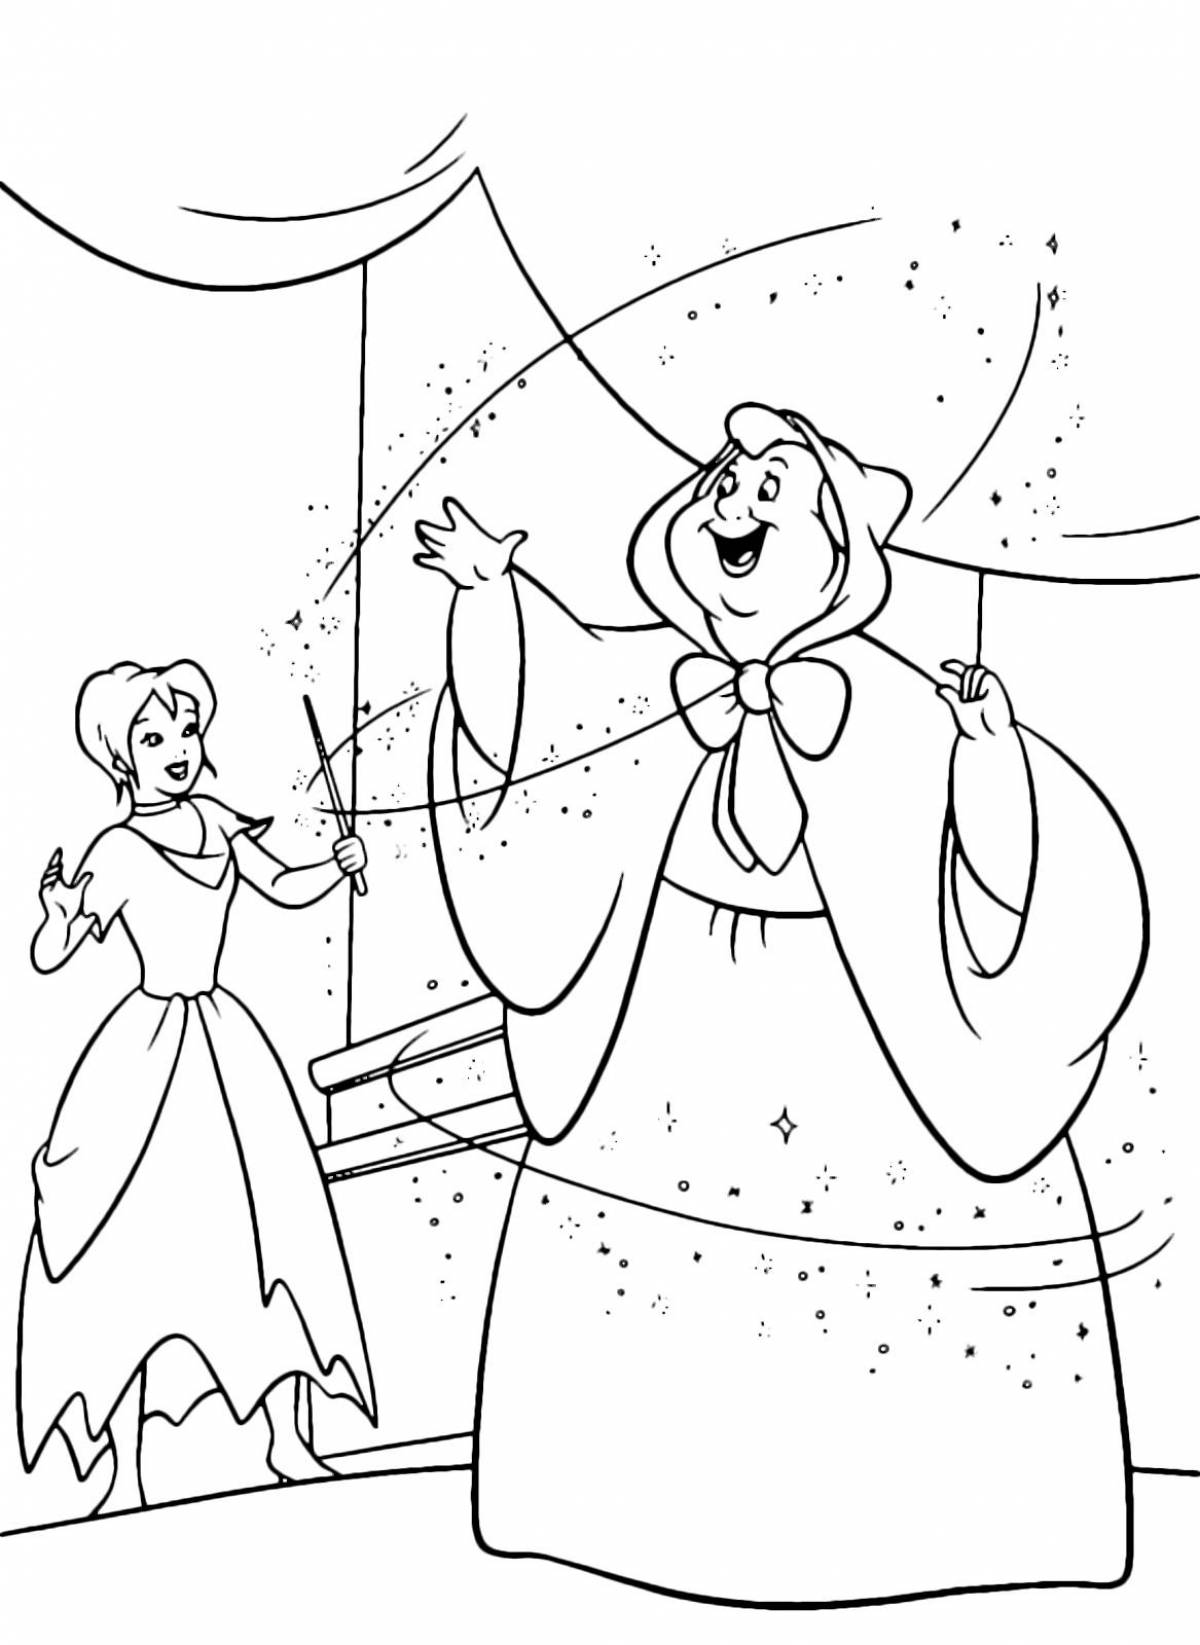 Colourful Cinderella coloring book for kids